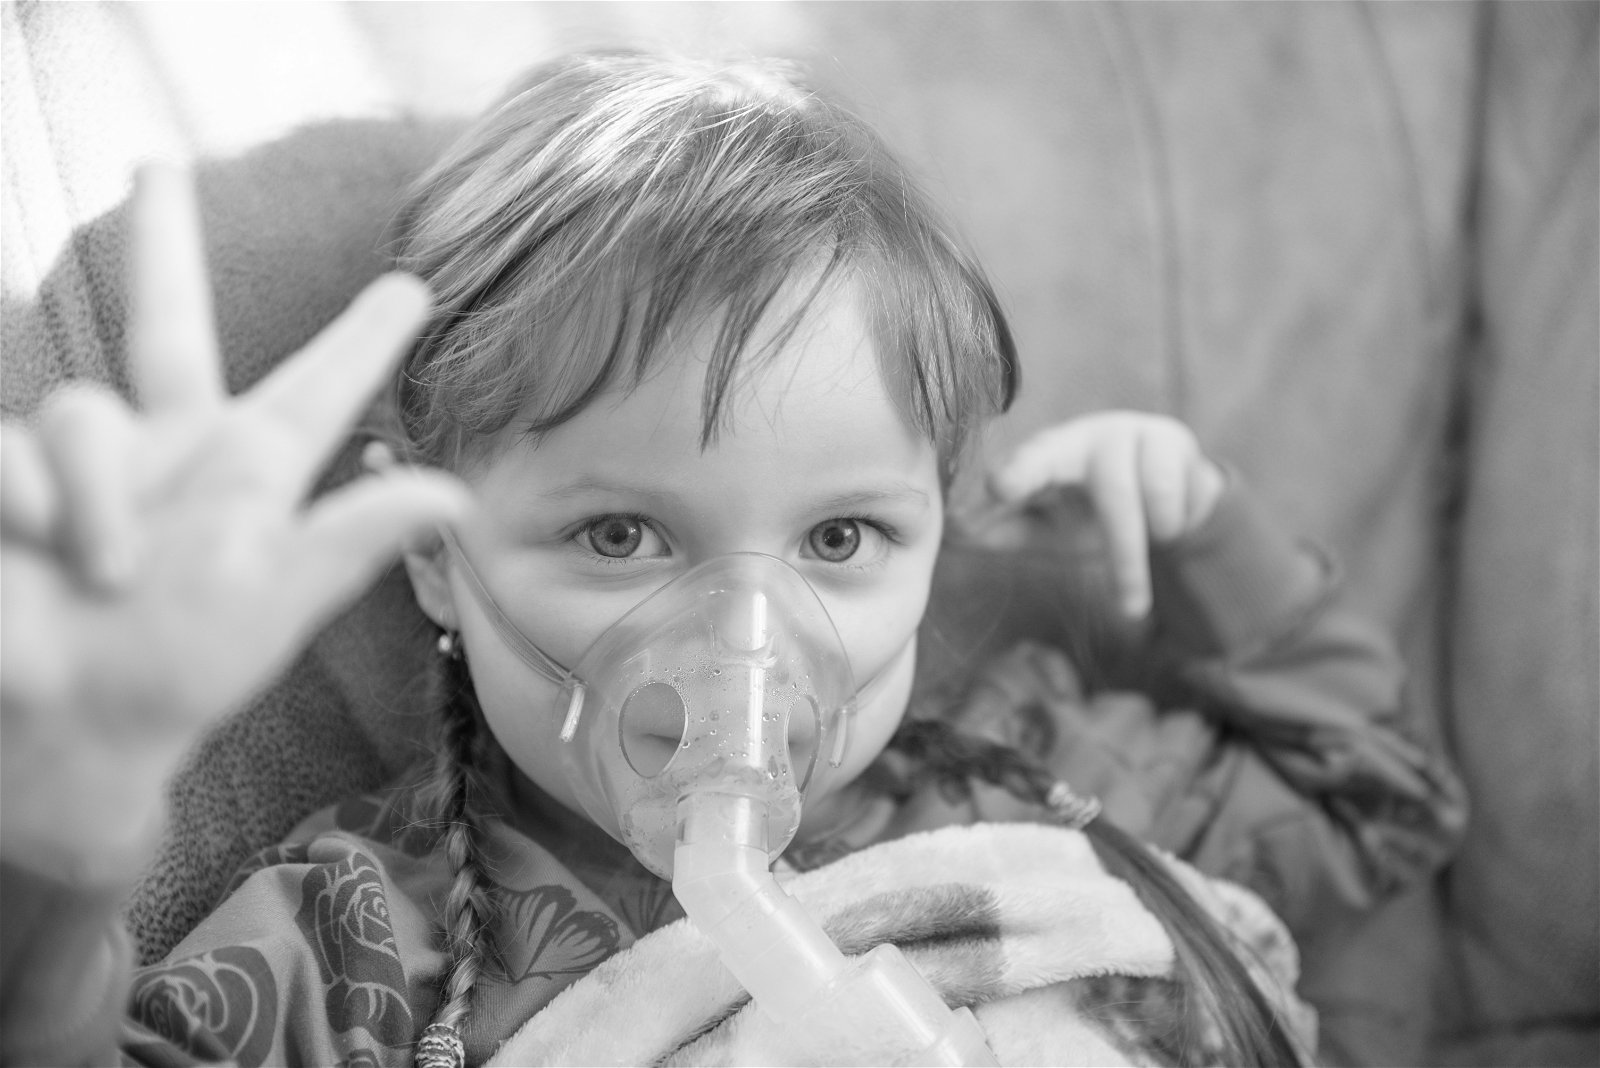 child/teen using therapy vest and nebulizer